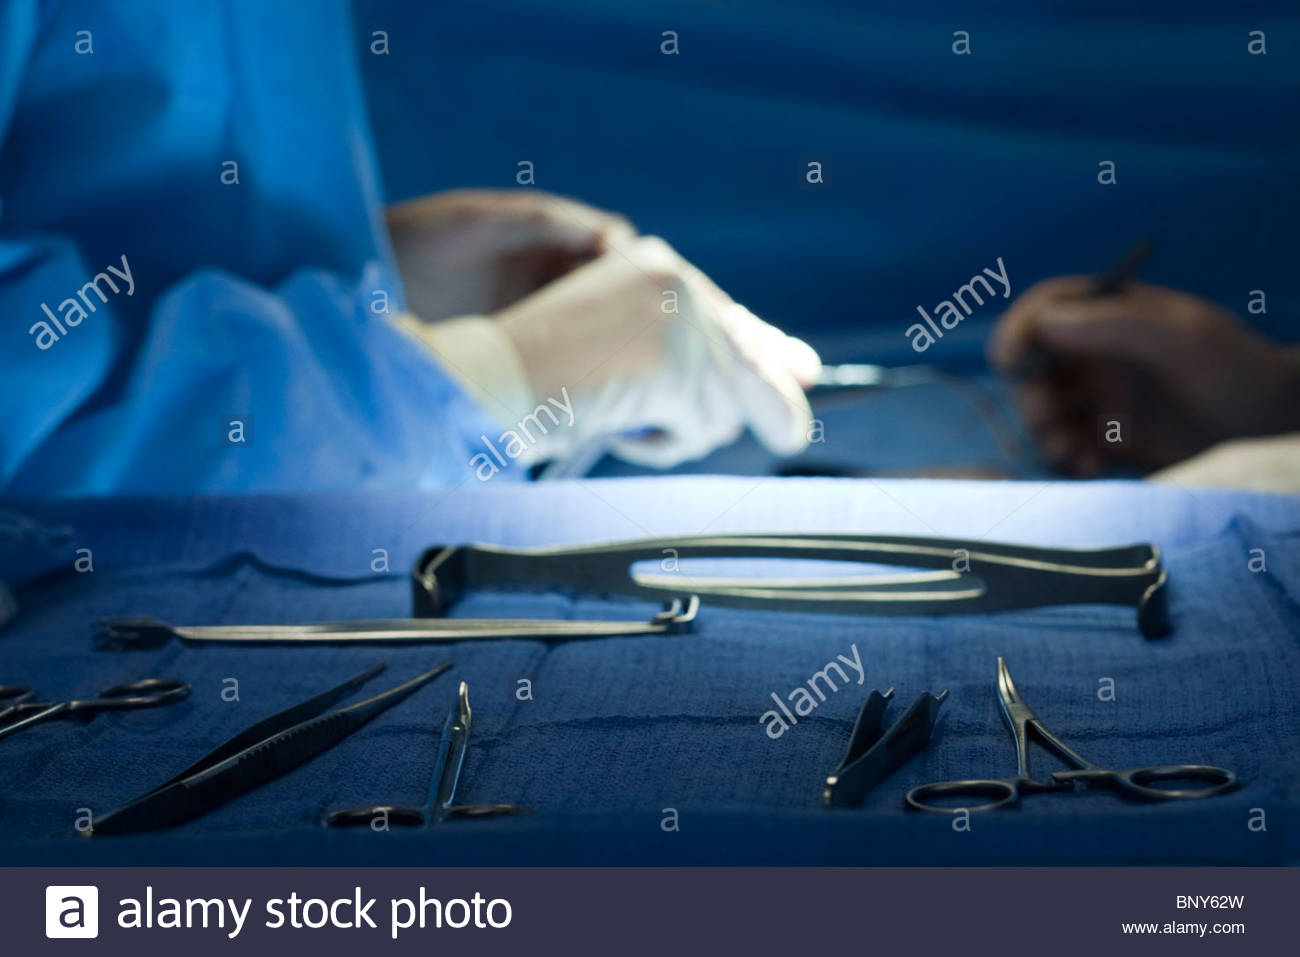 Surgical Instruments Arrayed On Tray Surgeons Operating In Stock